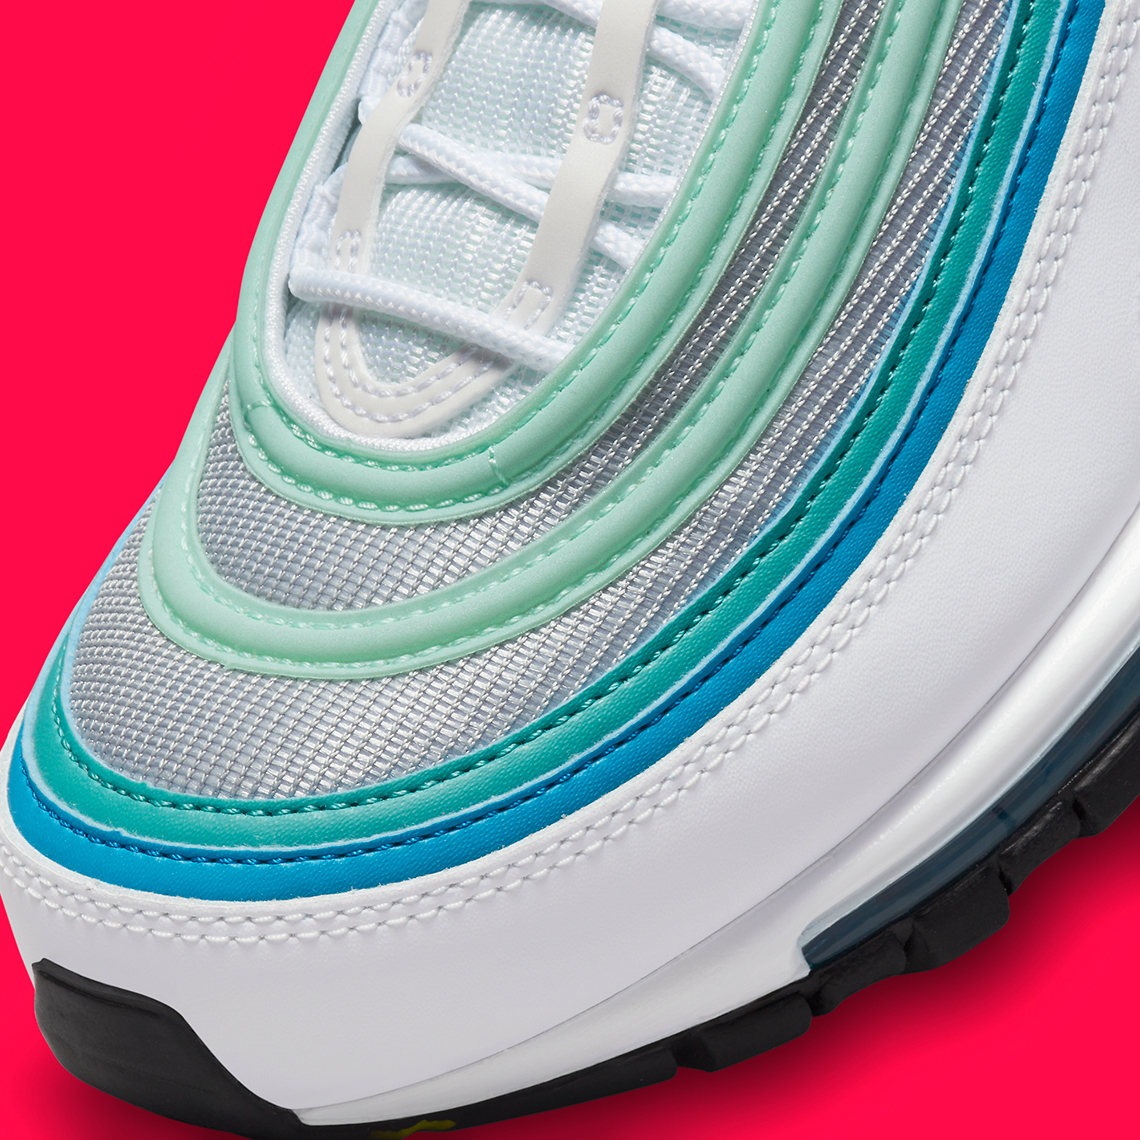 Nike Air Max 97 Cherry Blossom Release Date 1